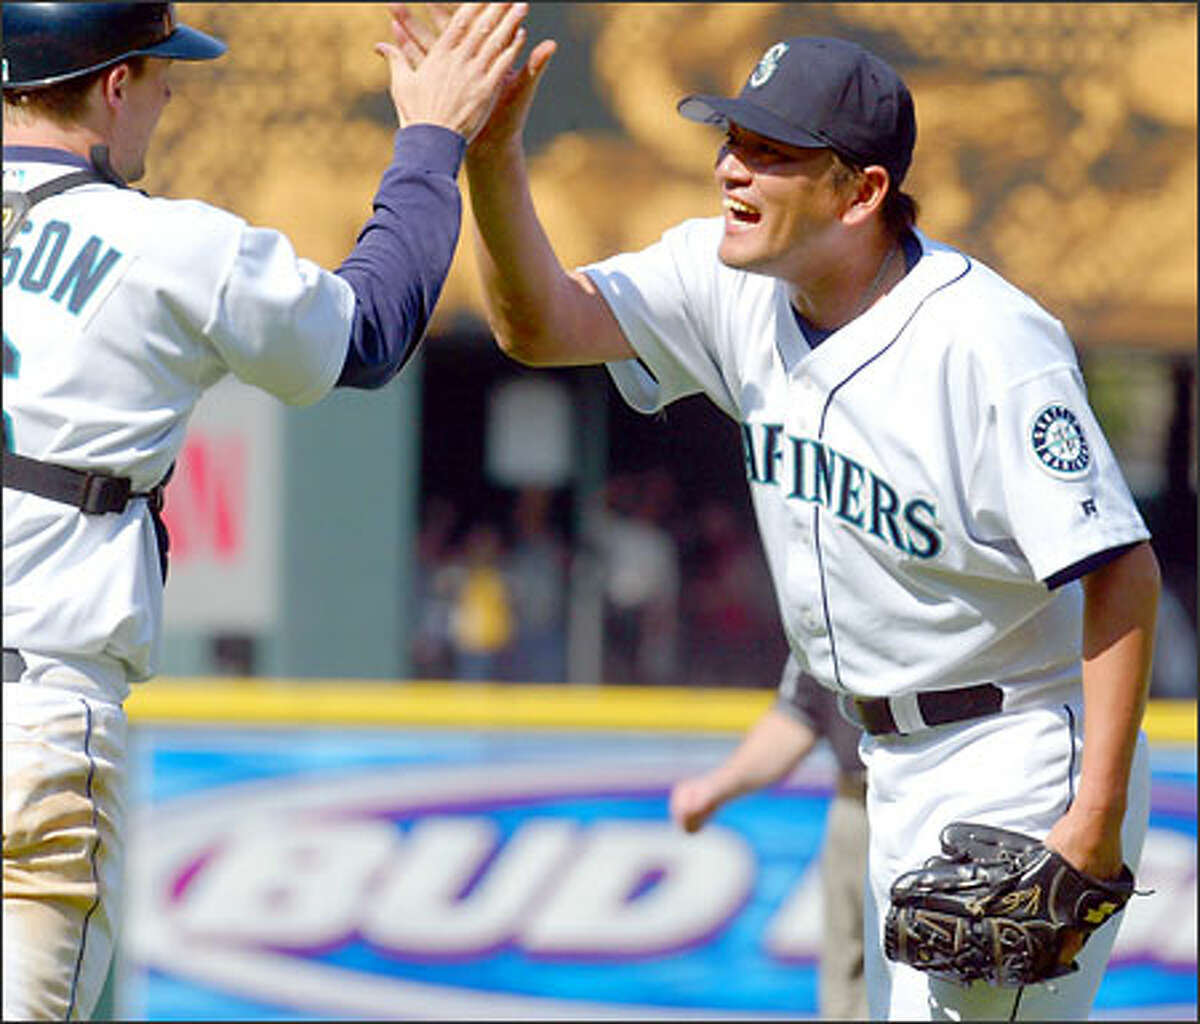 Mariners closer Kazuhiro Sasaki celebrates with catcher Dan Wilson after a victory over the White Sox at Safeco Field.